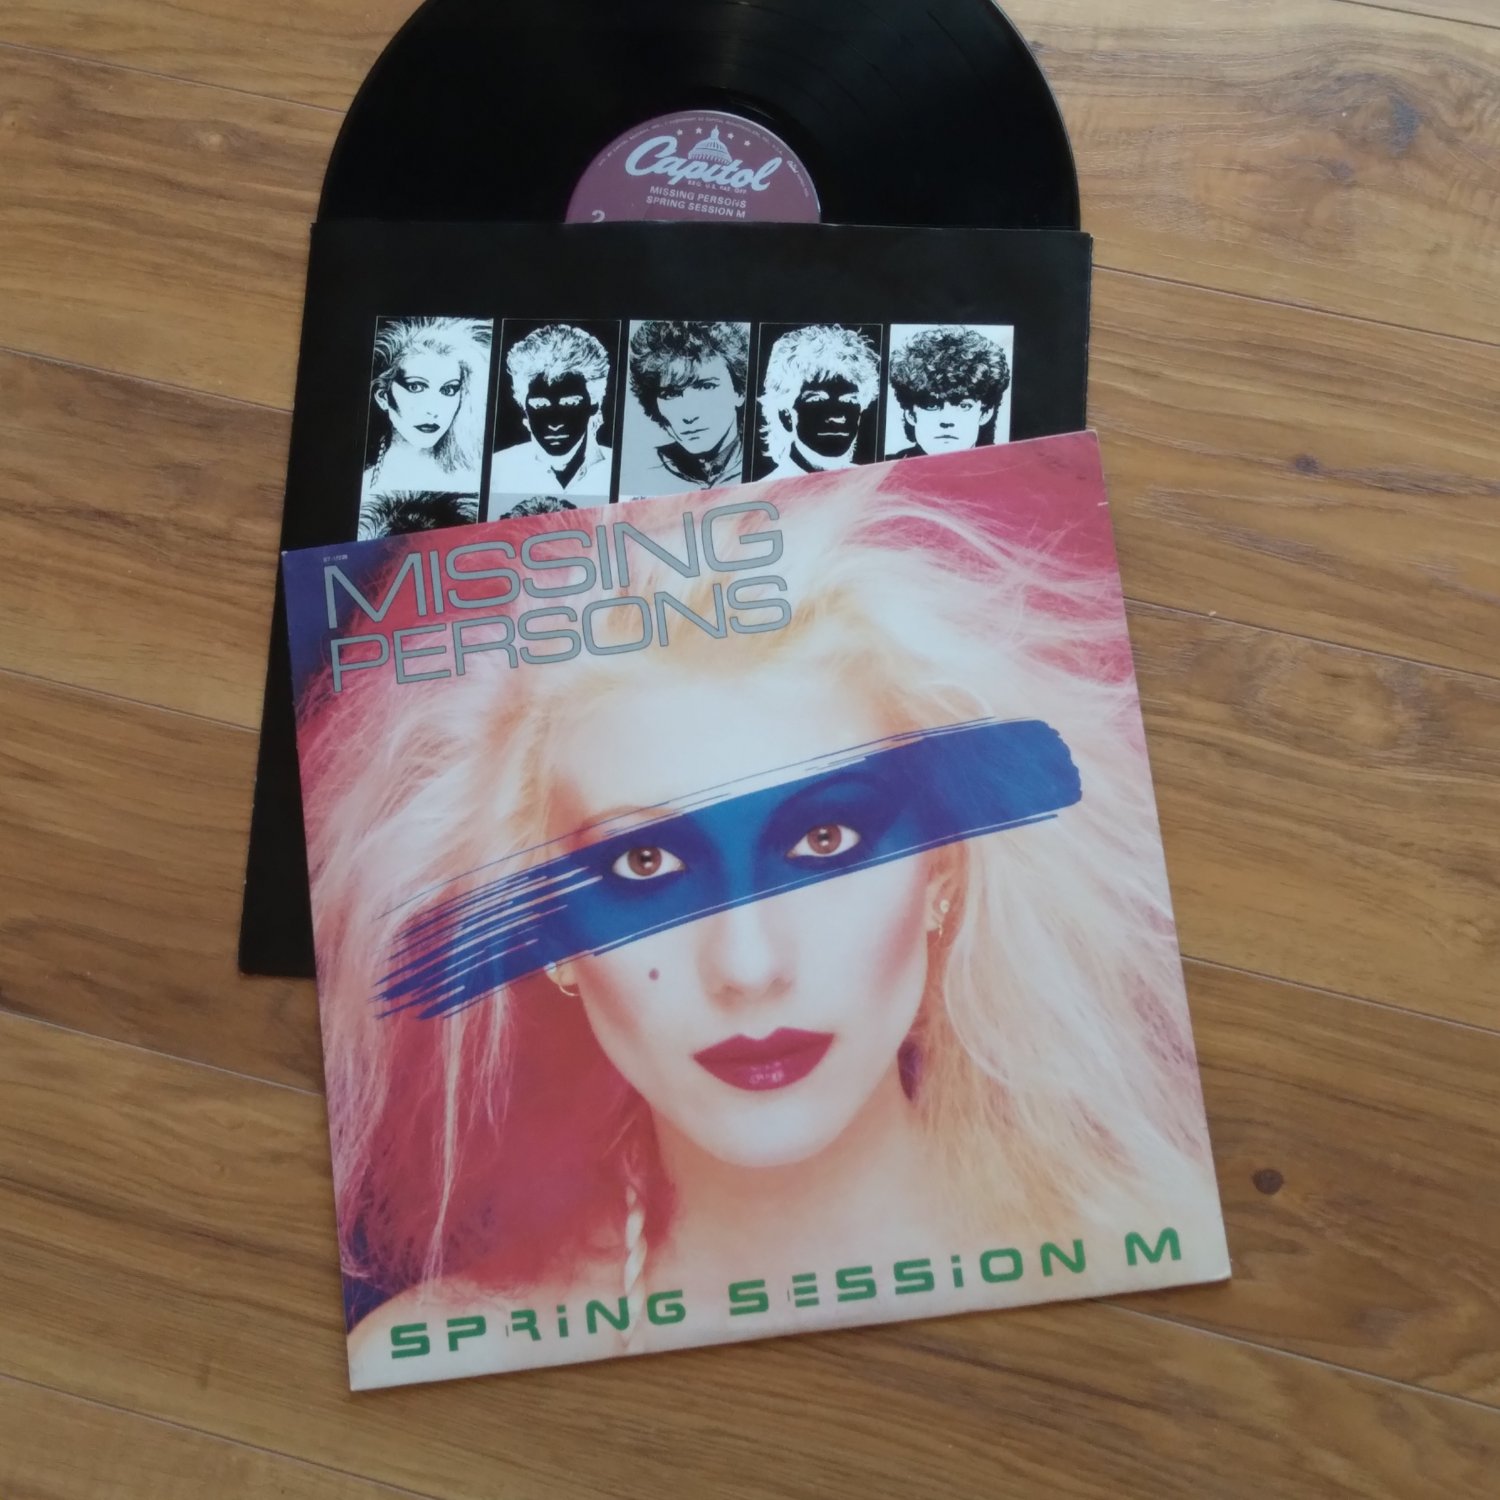 Spring Sessions M LP Missing Persons